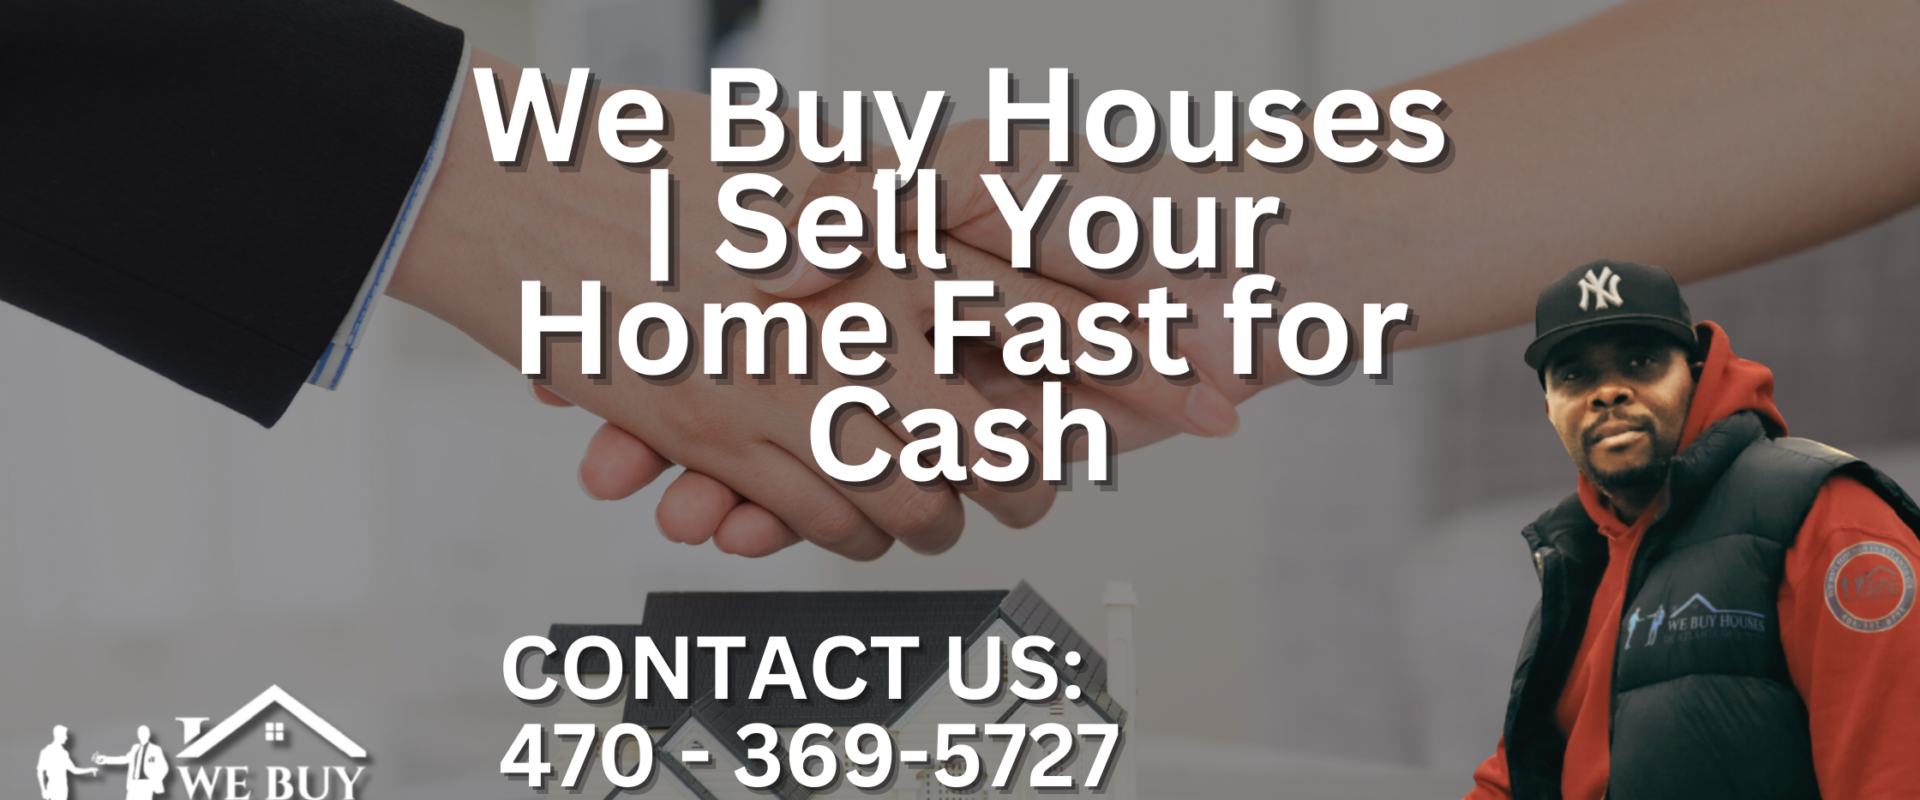 We Buy Houses | Sell Your Home Fast for Cash